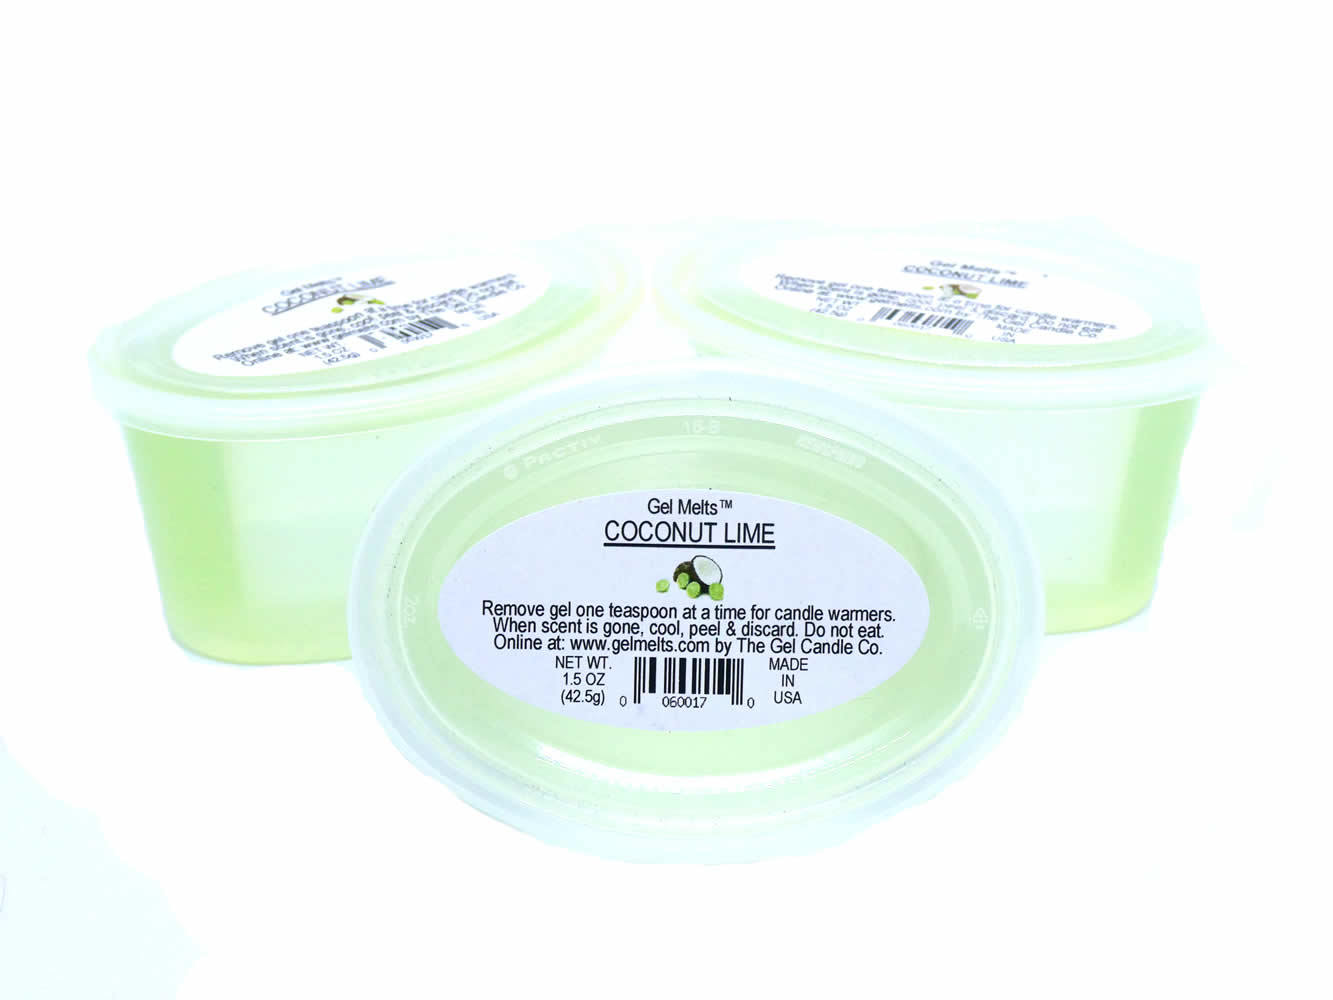 Primary image for Coconut Lime scented Gel Melts for tart/oil warmers - 3 pack